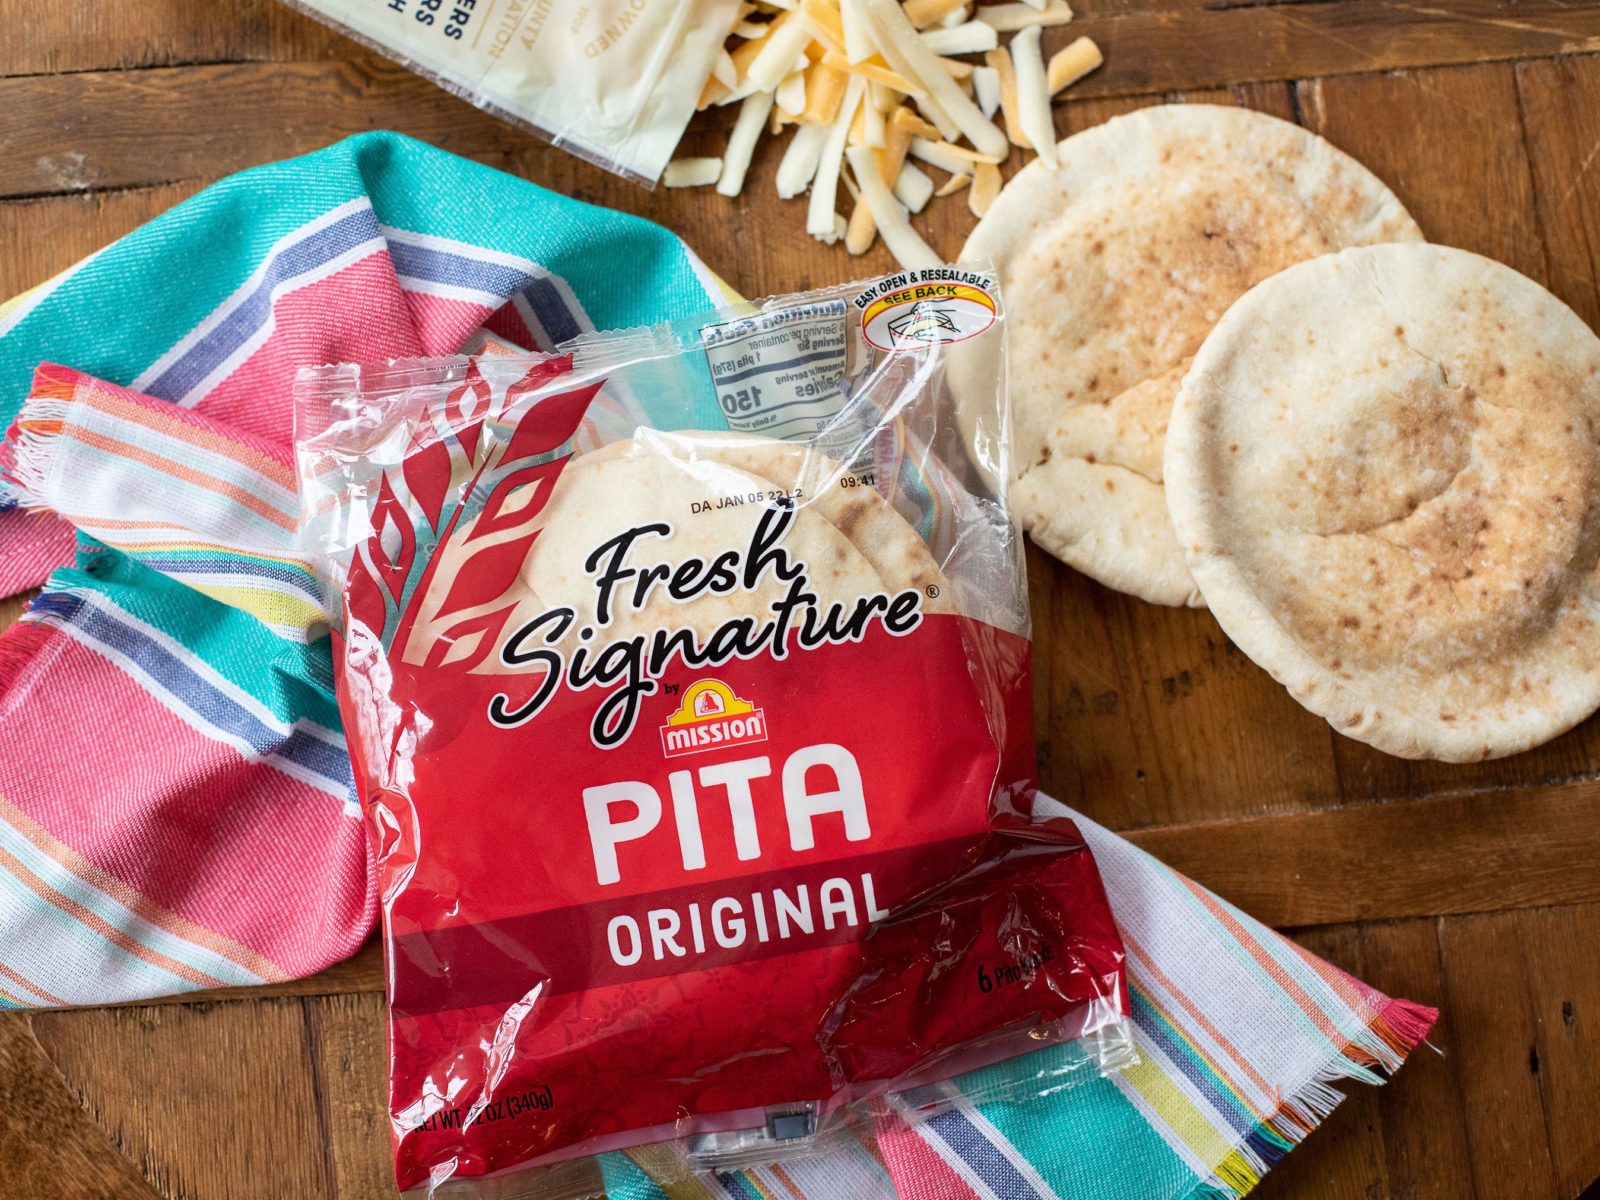 Grab A Pack Of New Mission Fresh Signature Pita Bread For Just 69¢ At Publix on I Heart Publix